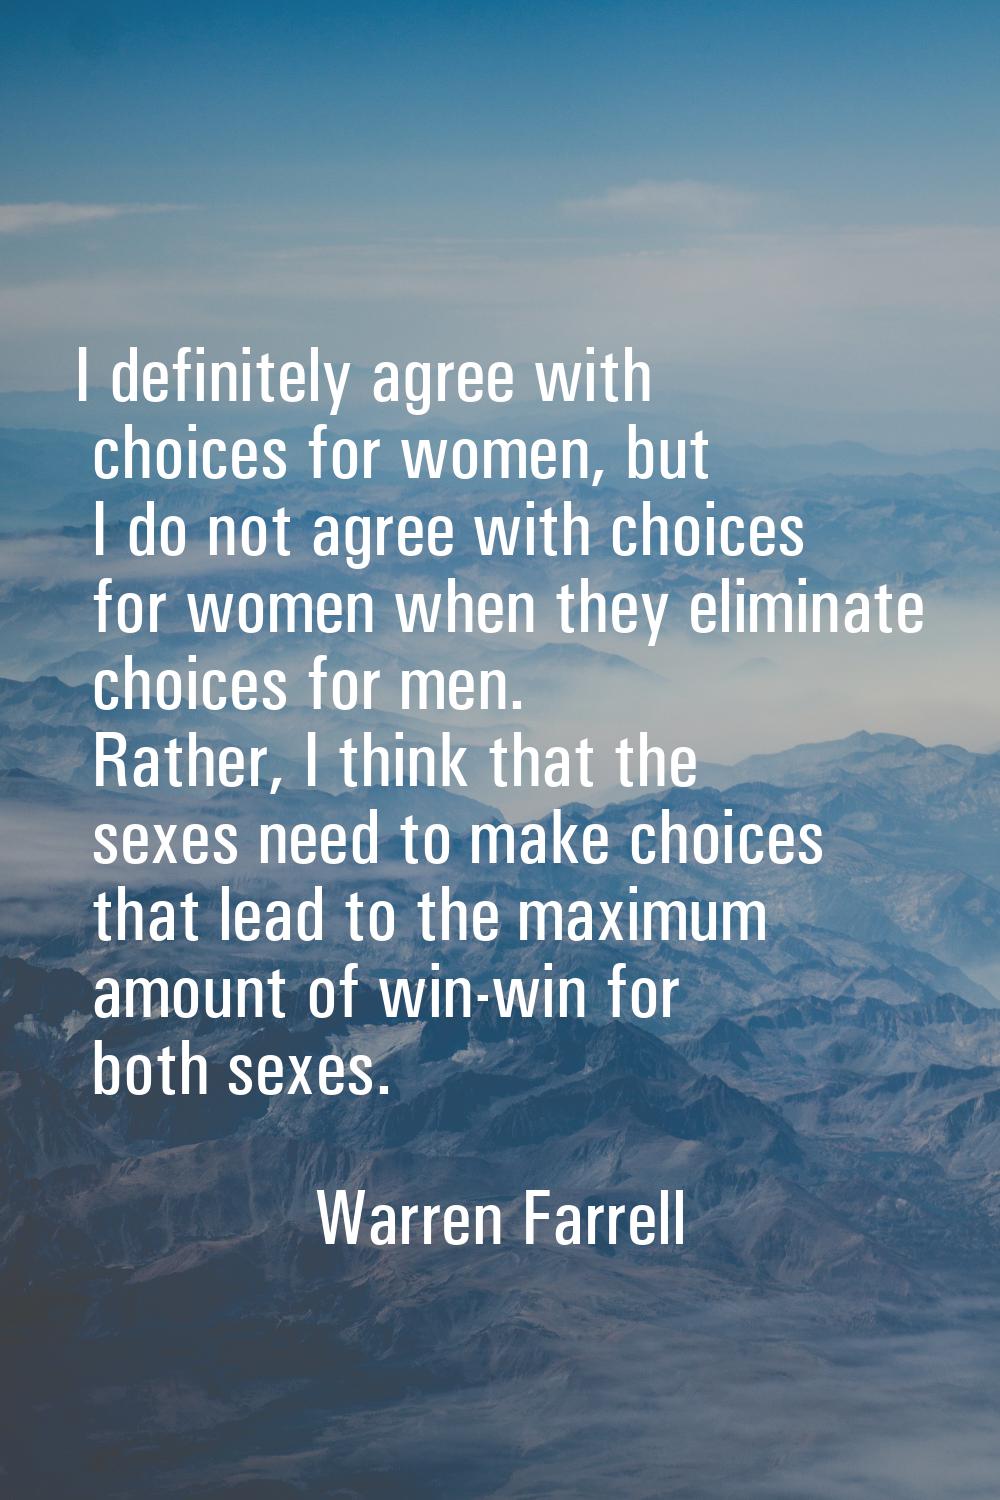 I definitely agree with choices for women, but I do not agree with choices for women when they elim